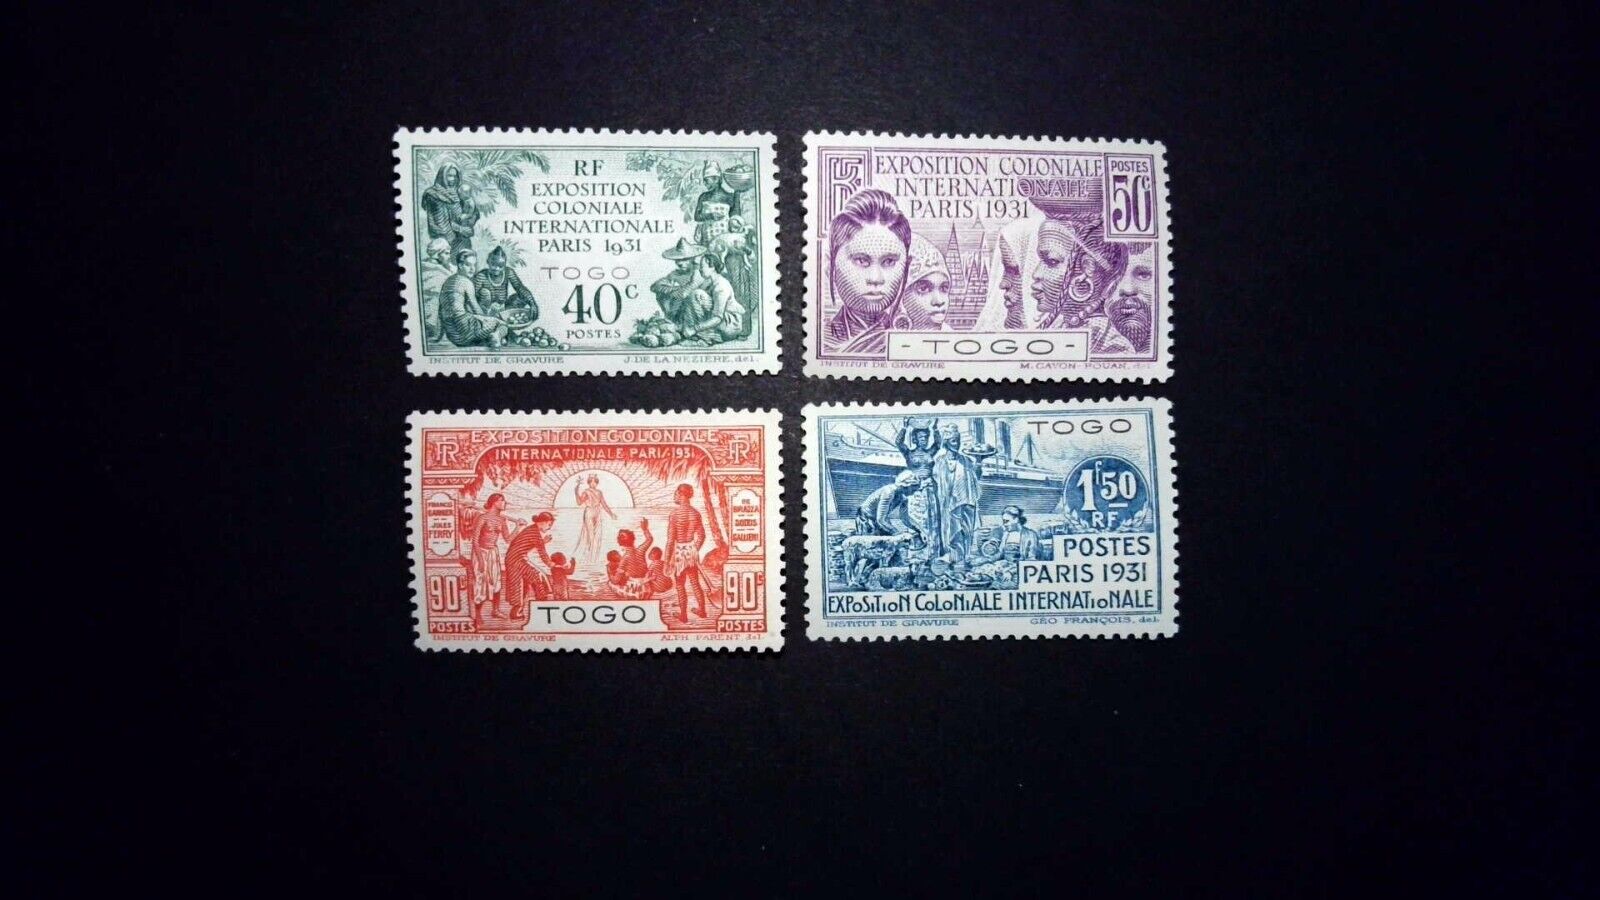 Togo 254-257 Complete Set Mint Hinged Lightly Mlh - 1931 Colonial Exhibition